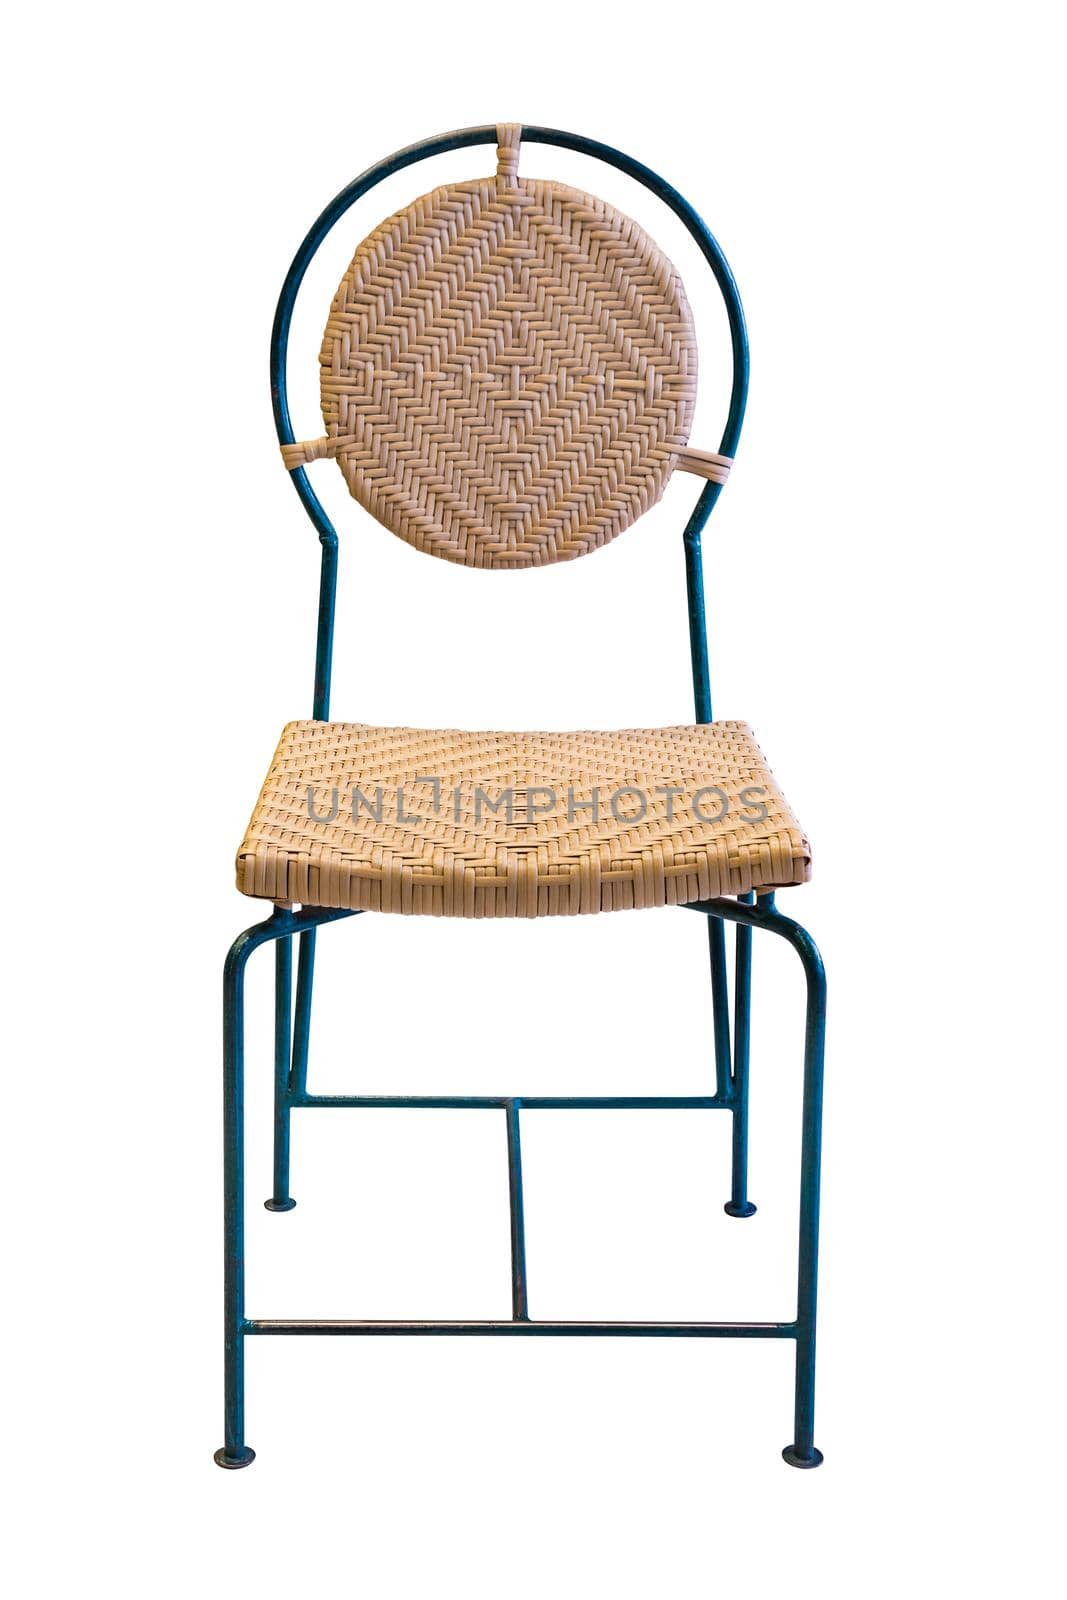 Chair steel legs with rattan cover isolated on white, work with clipping path.